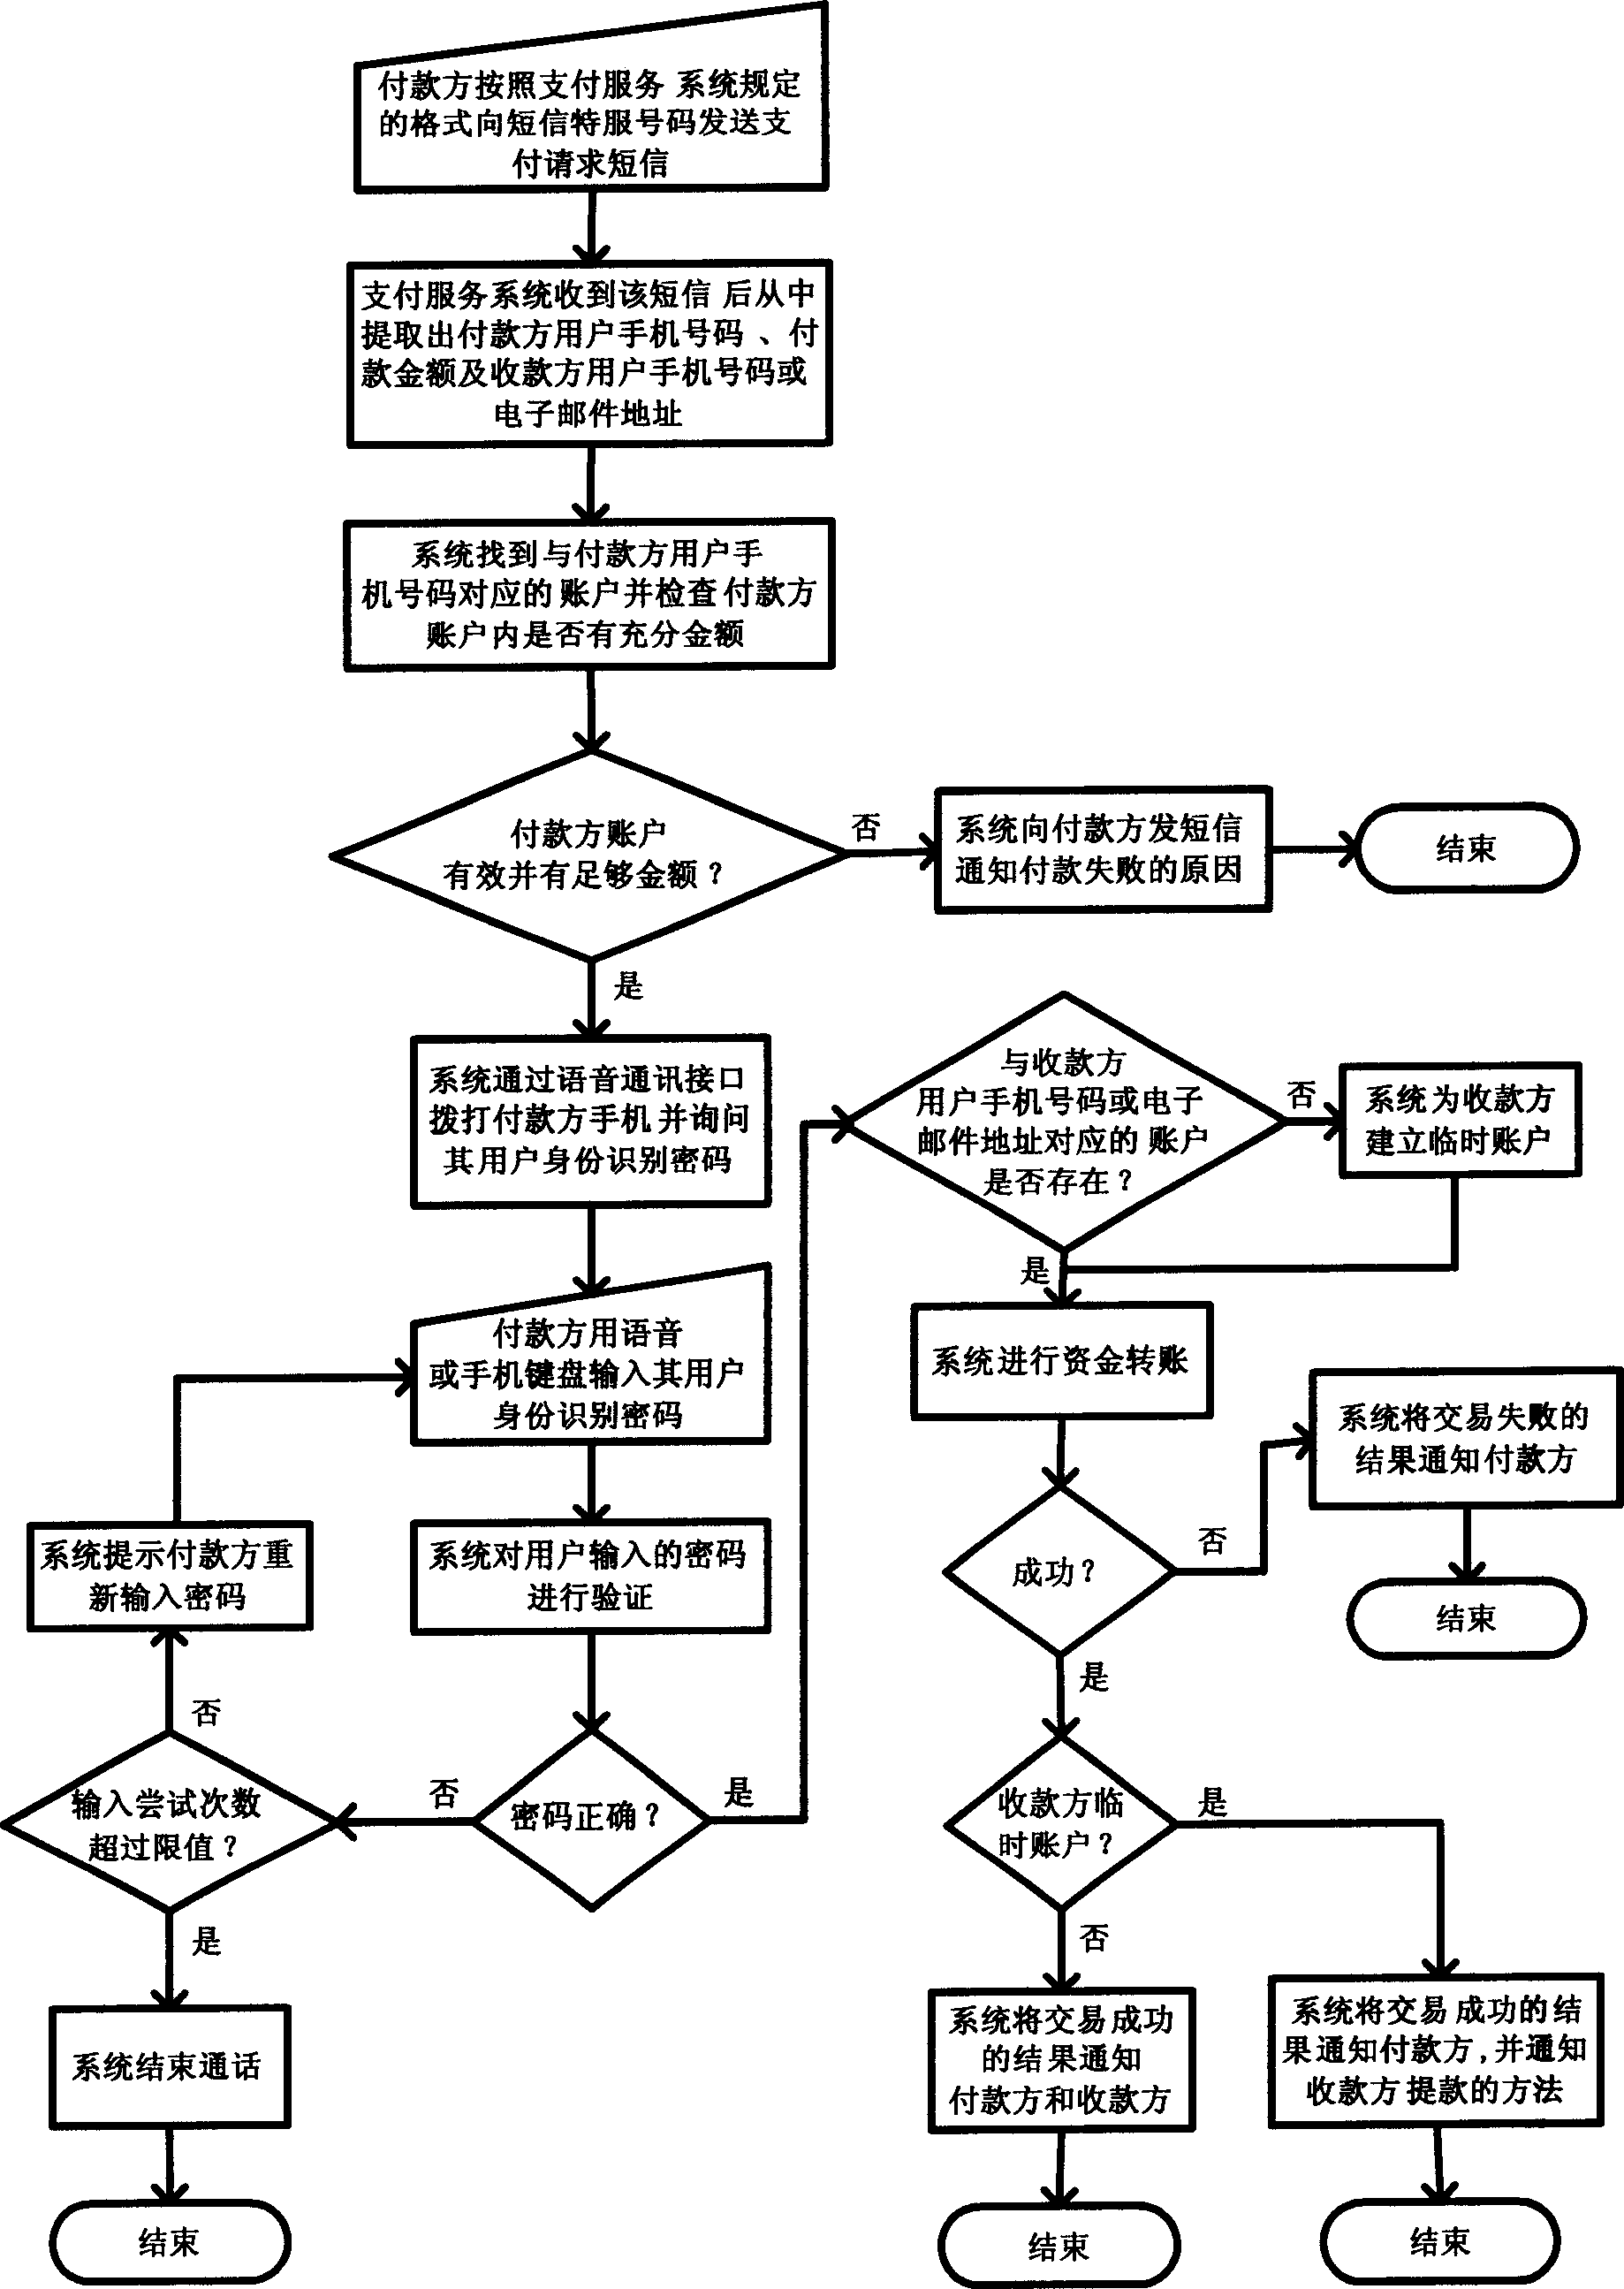 Method for achieving payment of one individual to another using voice and short message communication